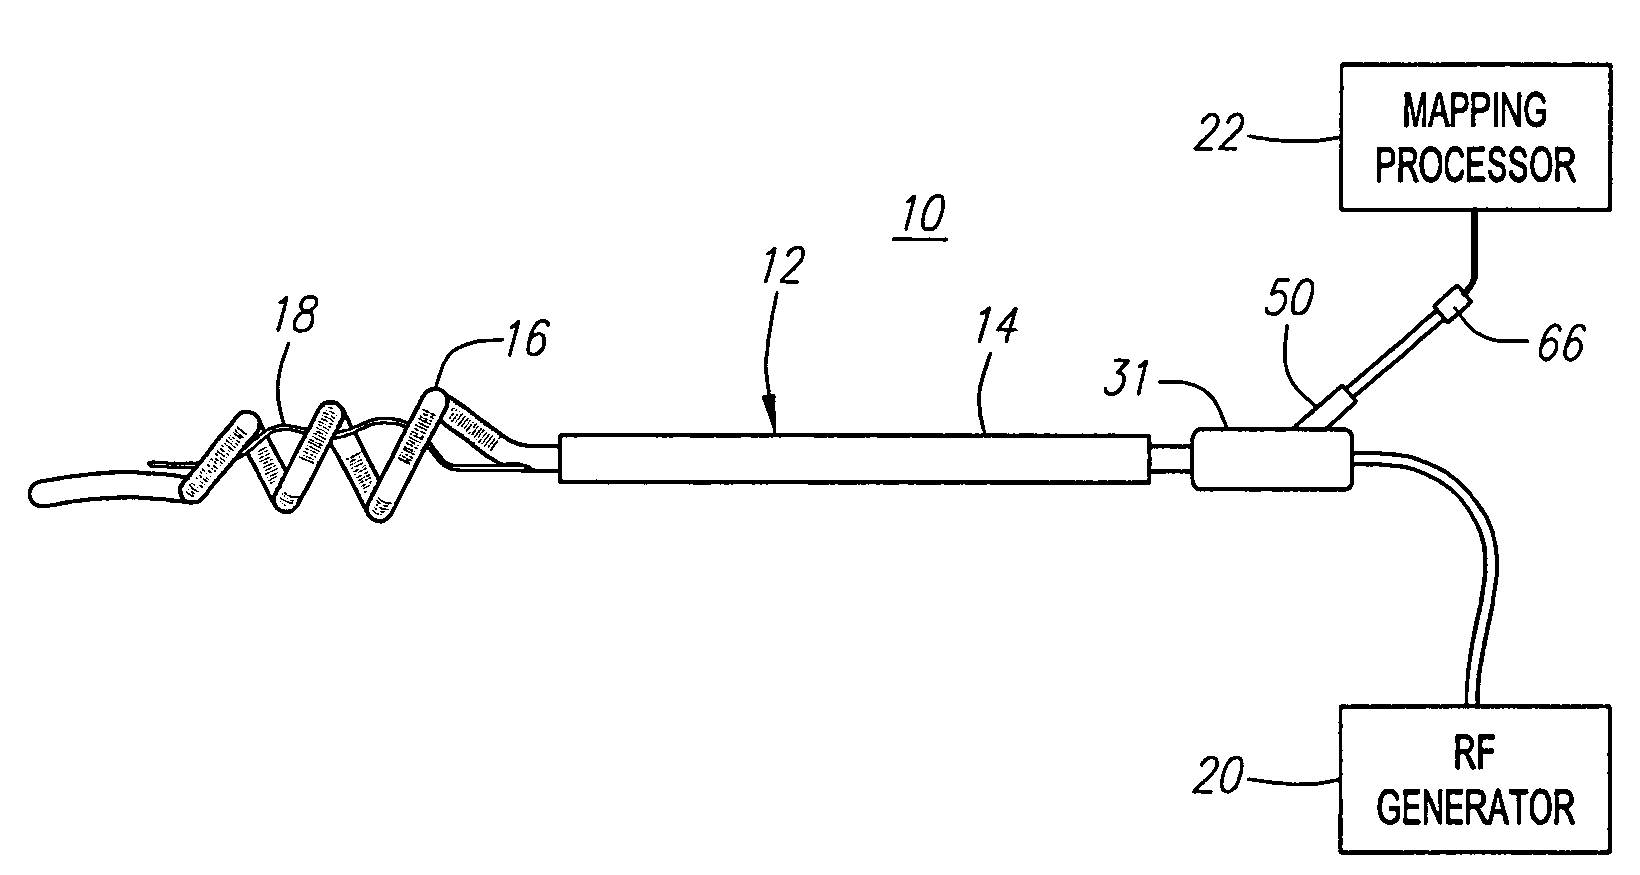 Medical probes for creating and diagnosing circumferential lesions within or around the ostium of a vessel